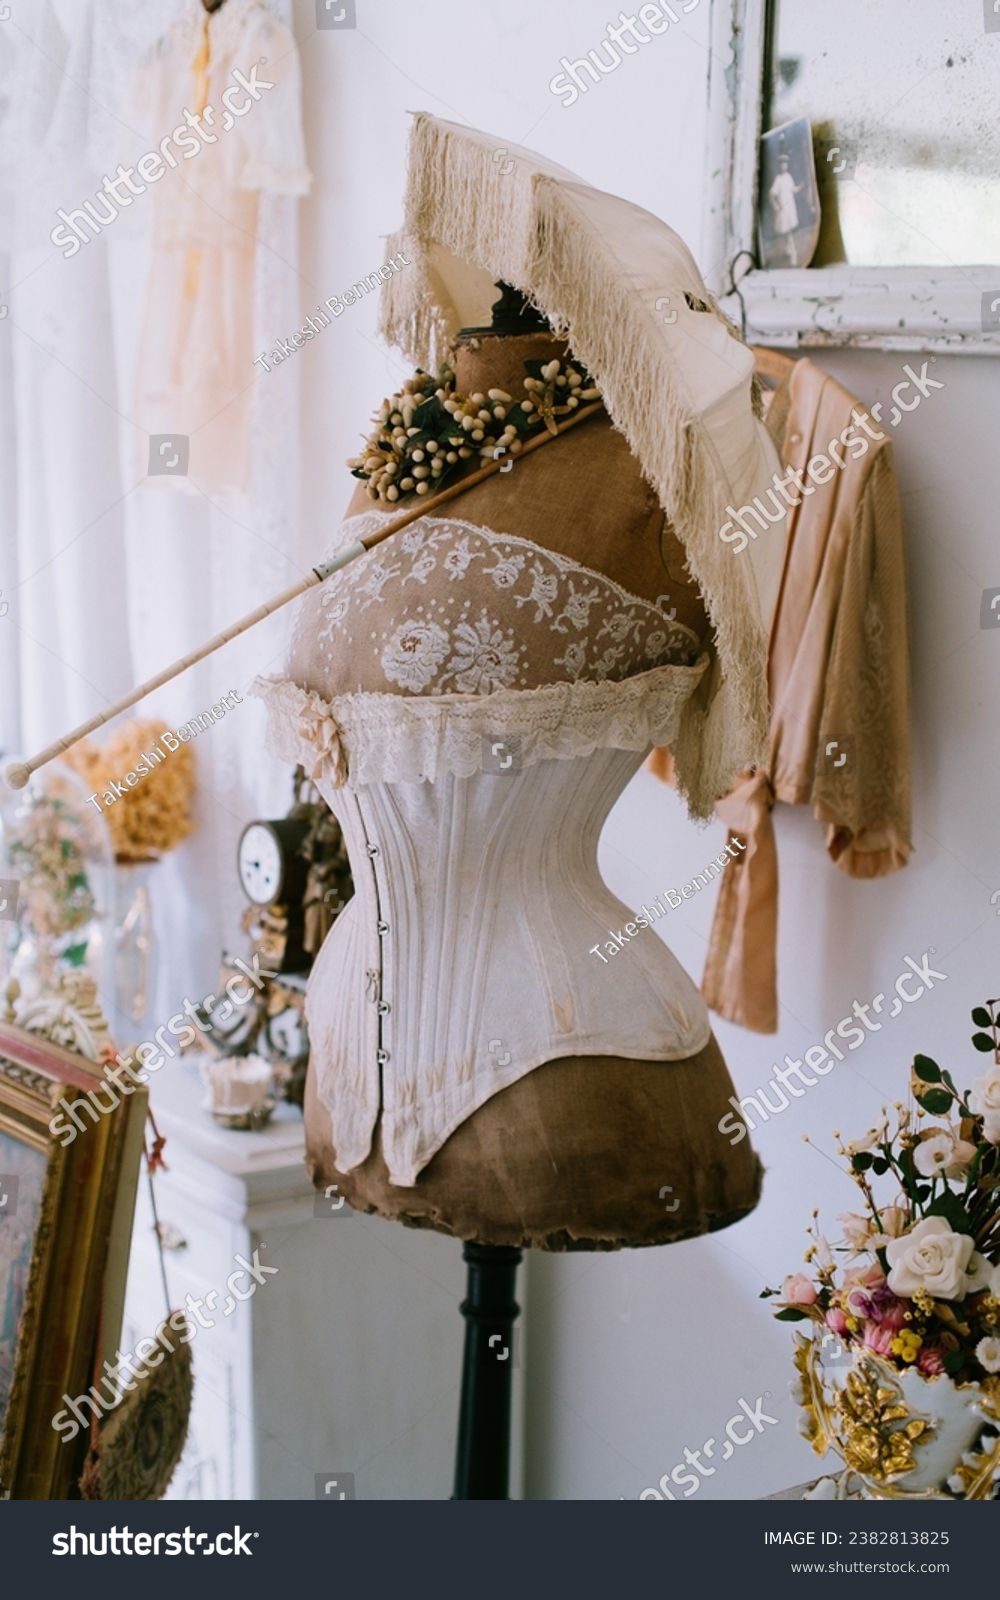 Antique Victorian corset and umbrella in a French antique store, with nice creamy colors and an old Victorian tone #2382813825